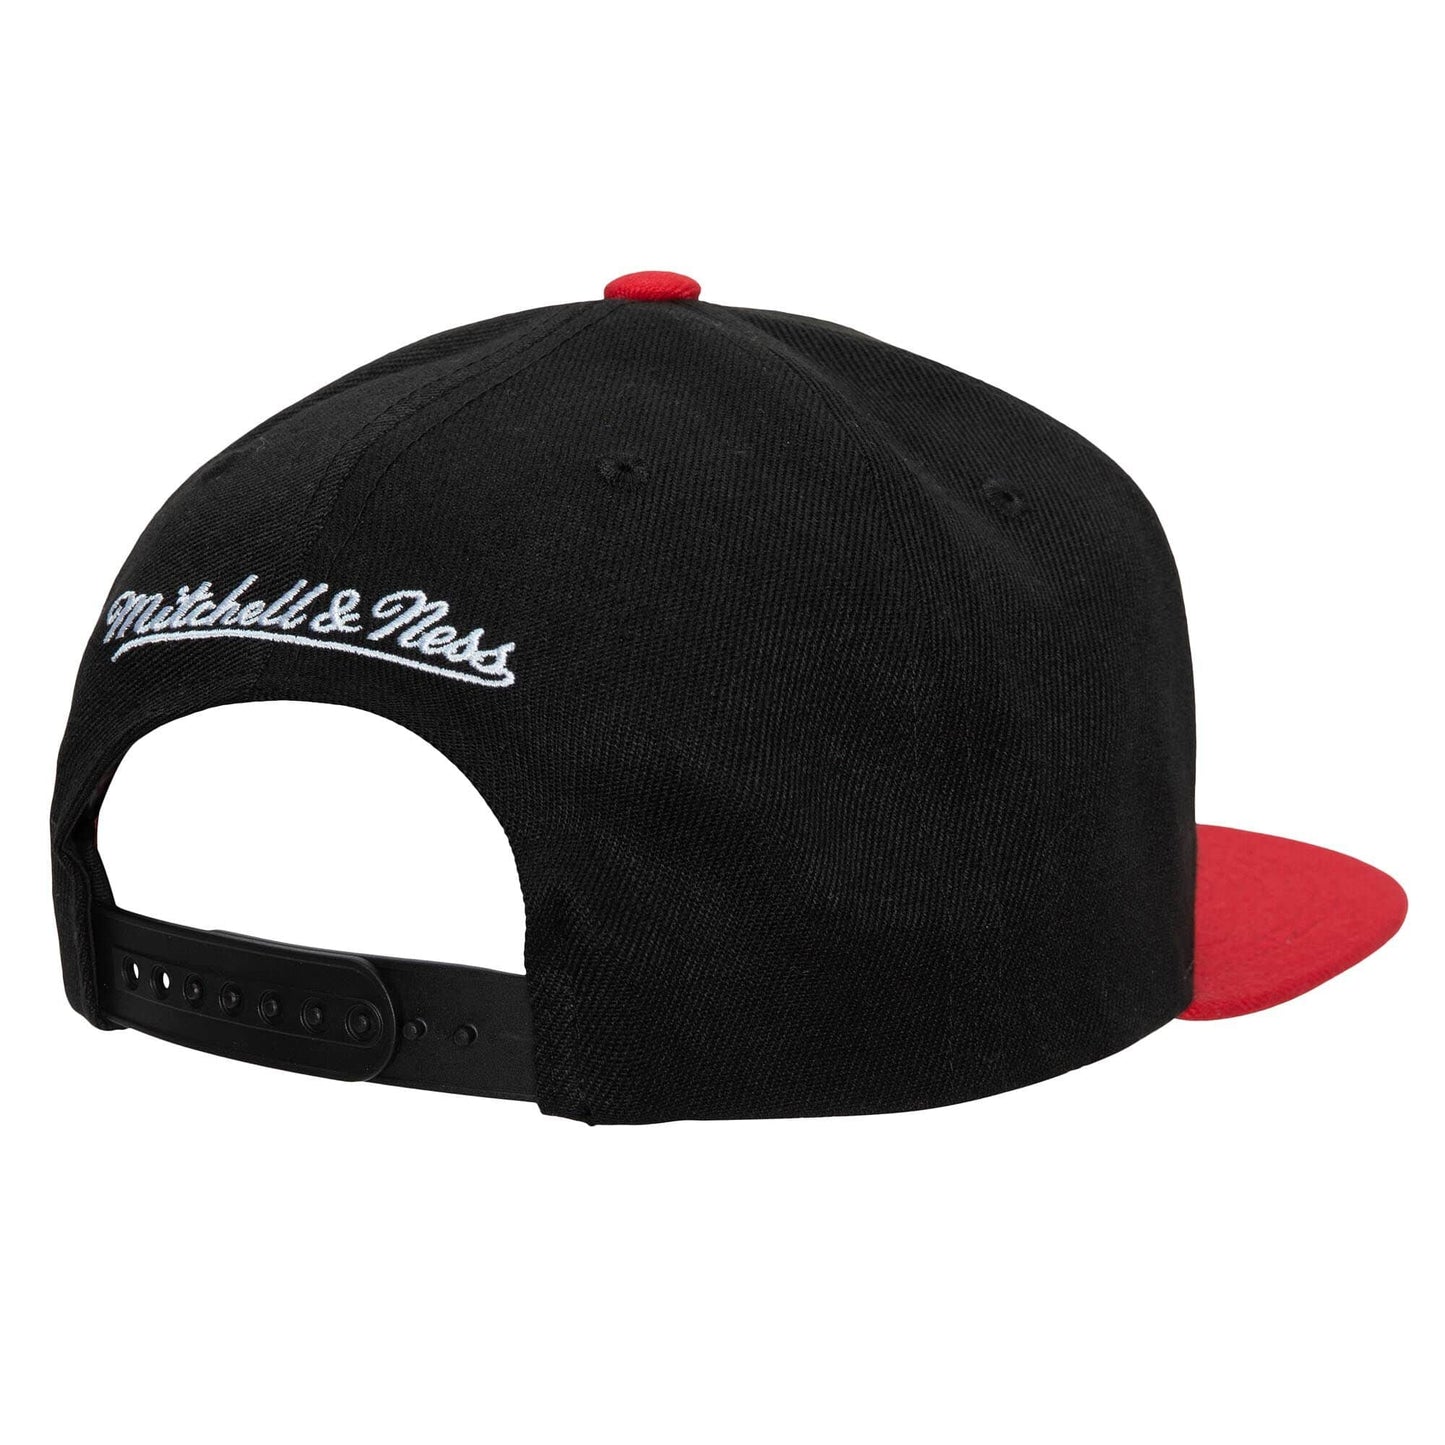 Men's Chicago Bulls Mitchell & Ness 2 Tone Black and Red Low Big Face Hardwood Classics Snapback Hat